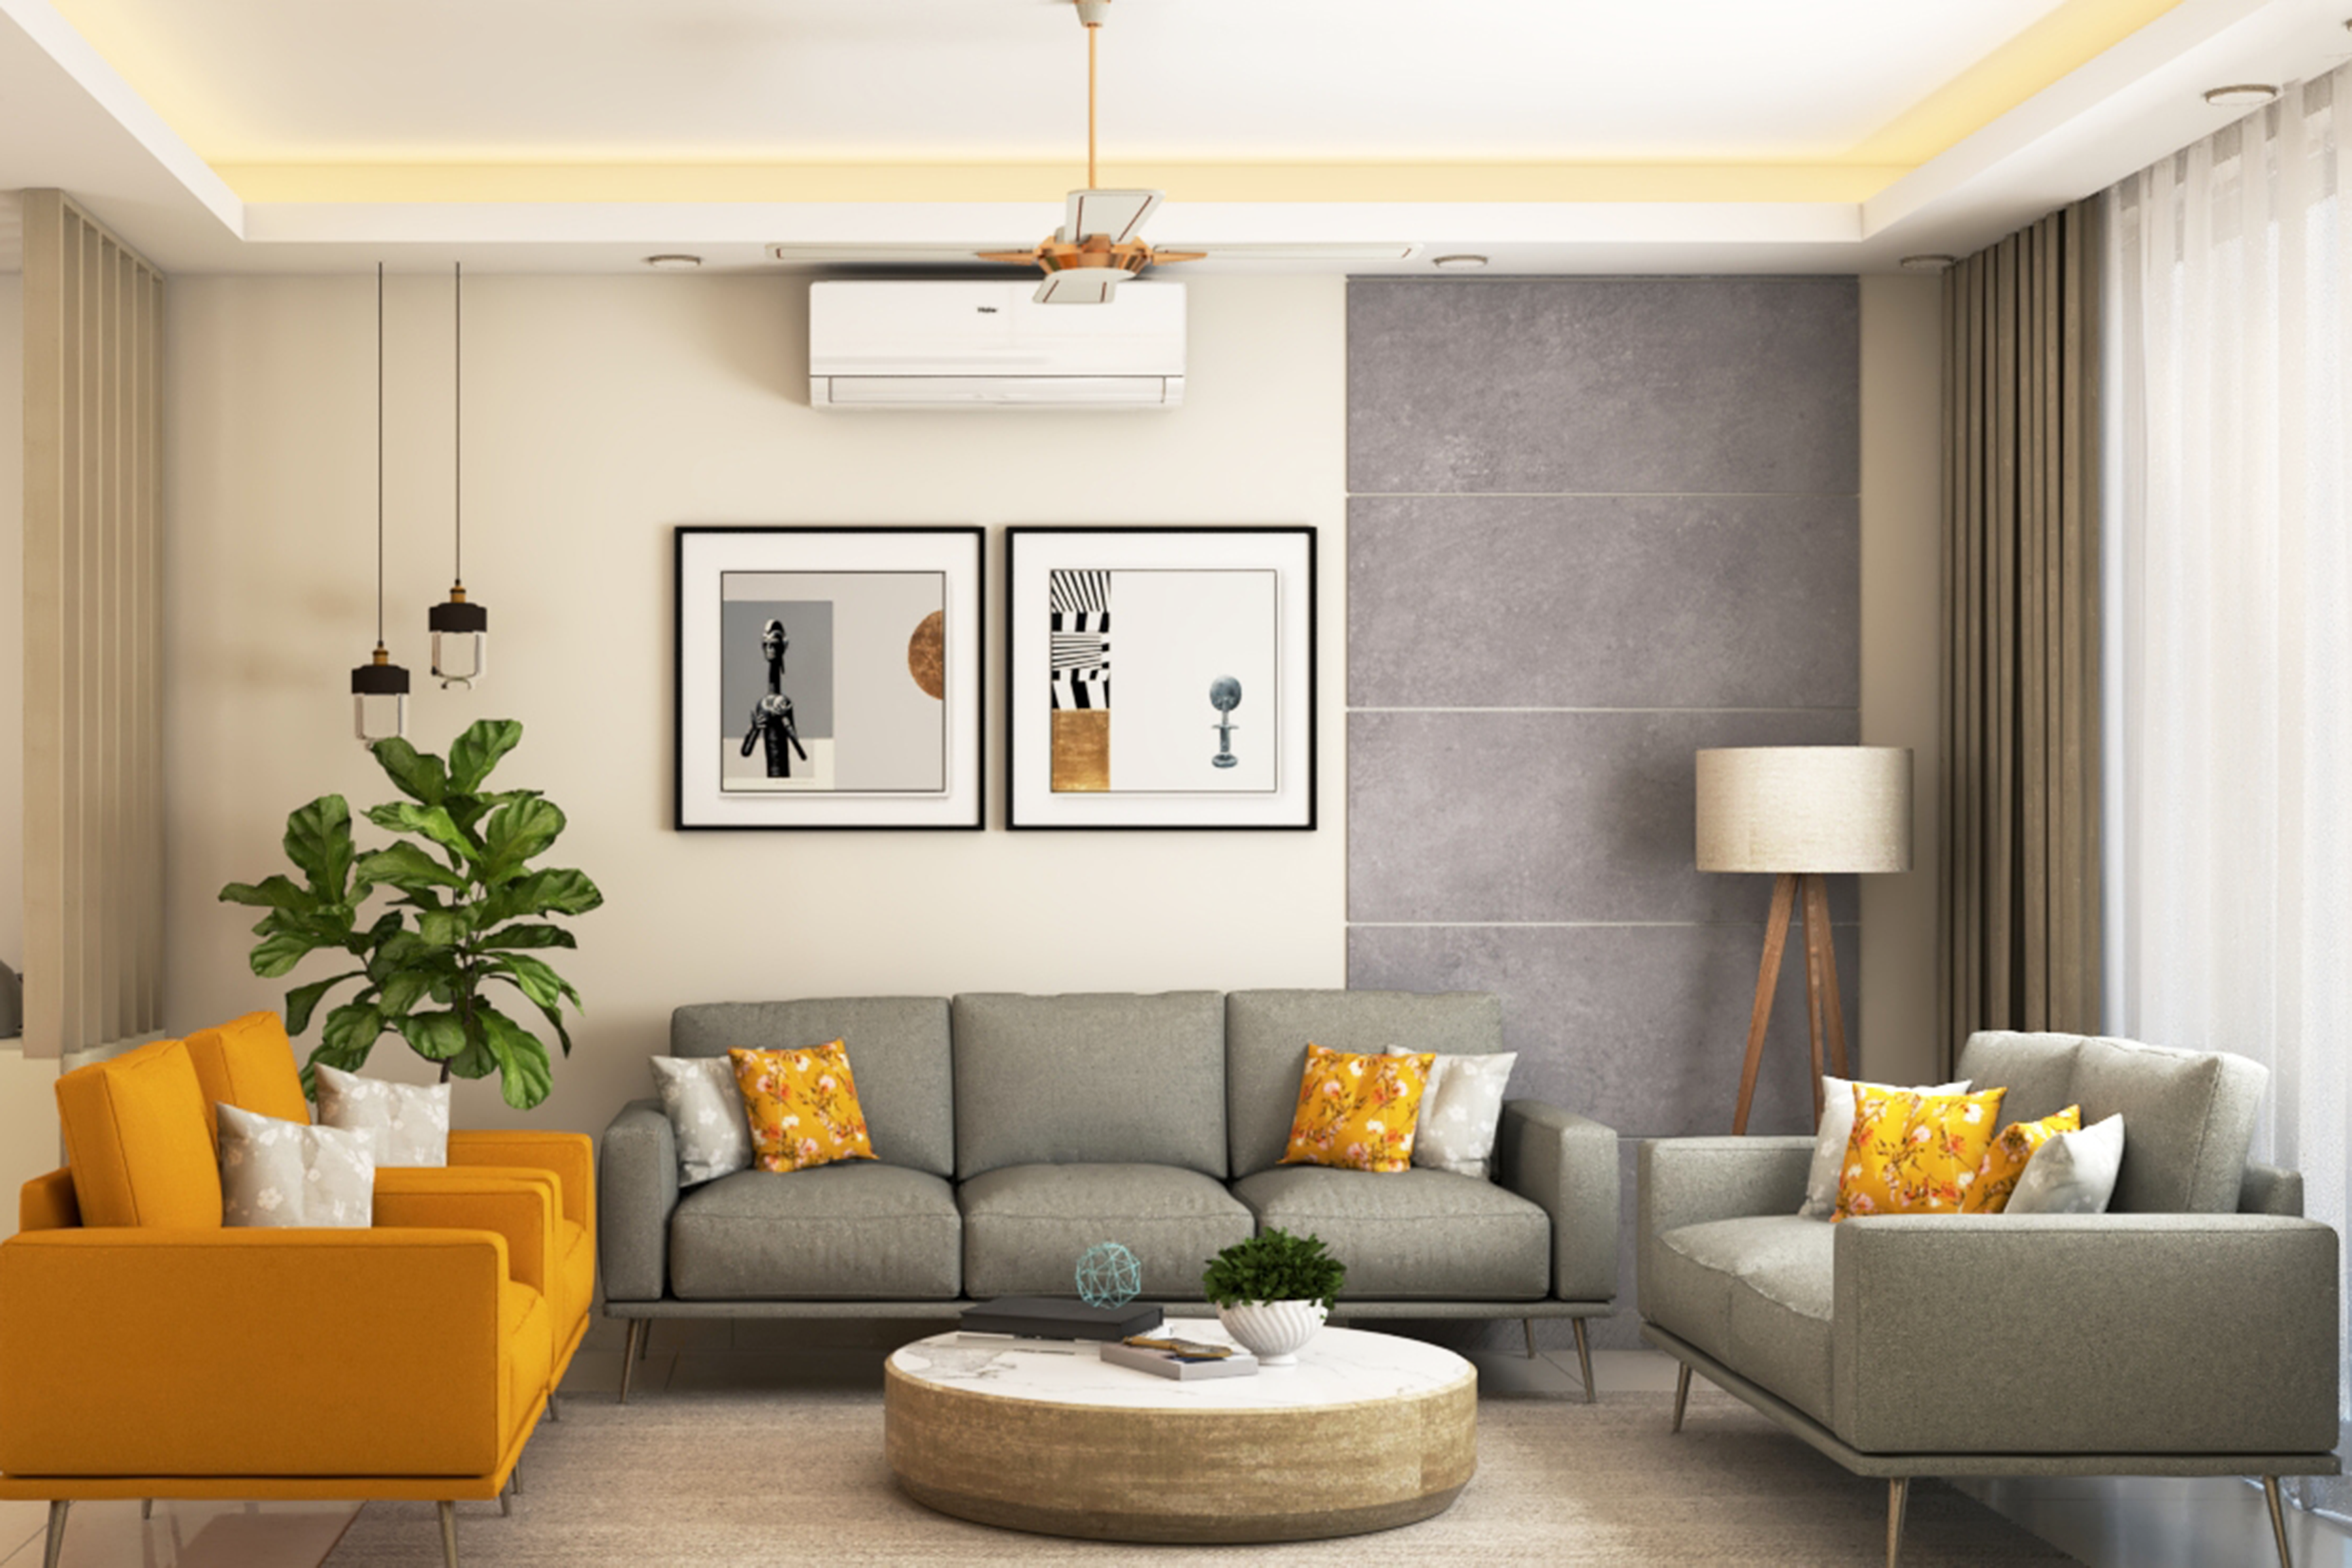 Contemporary U-Shaped Living Room Design In Yellow And Grey